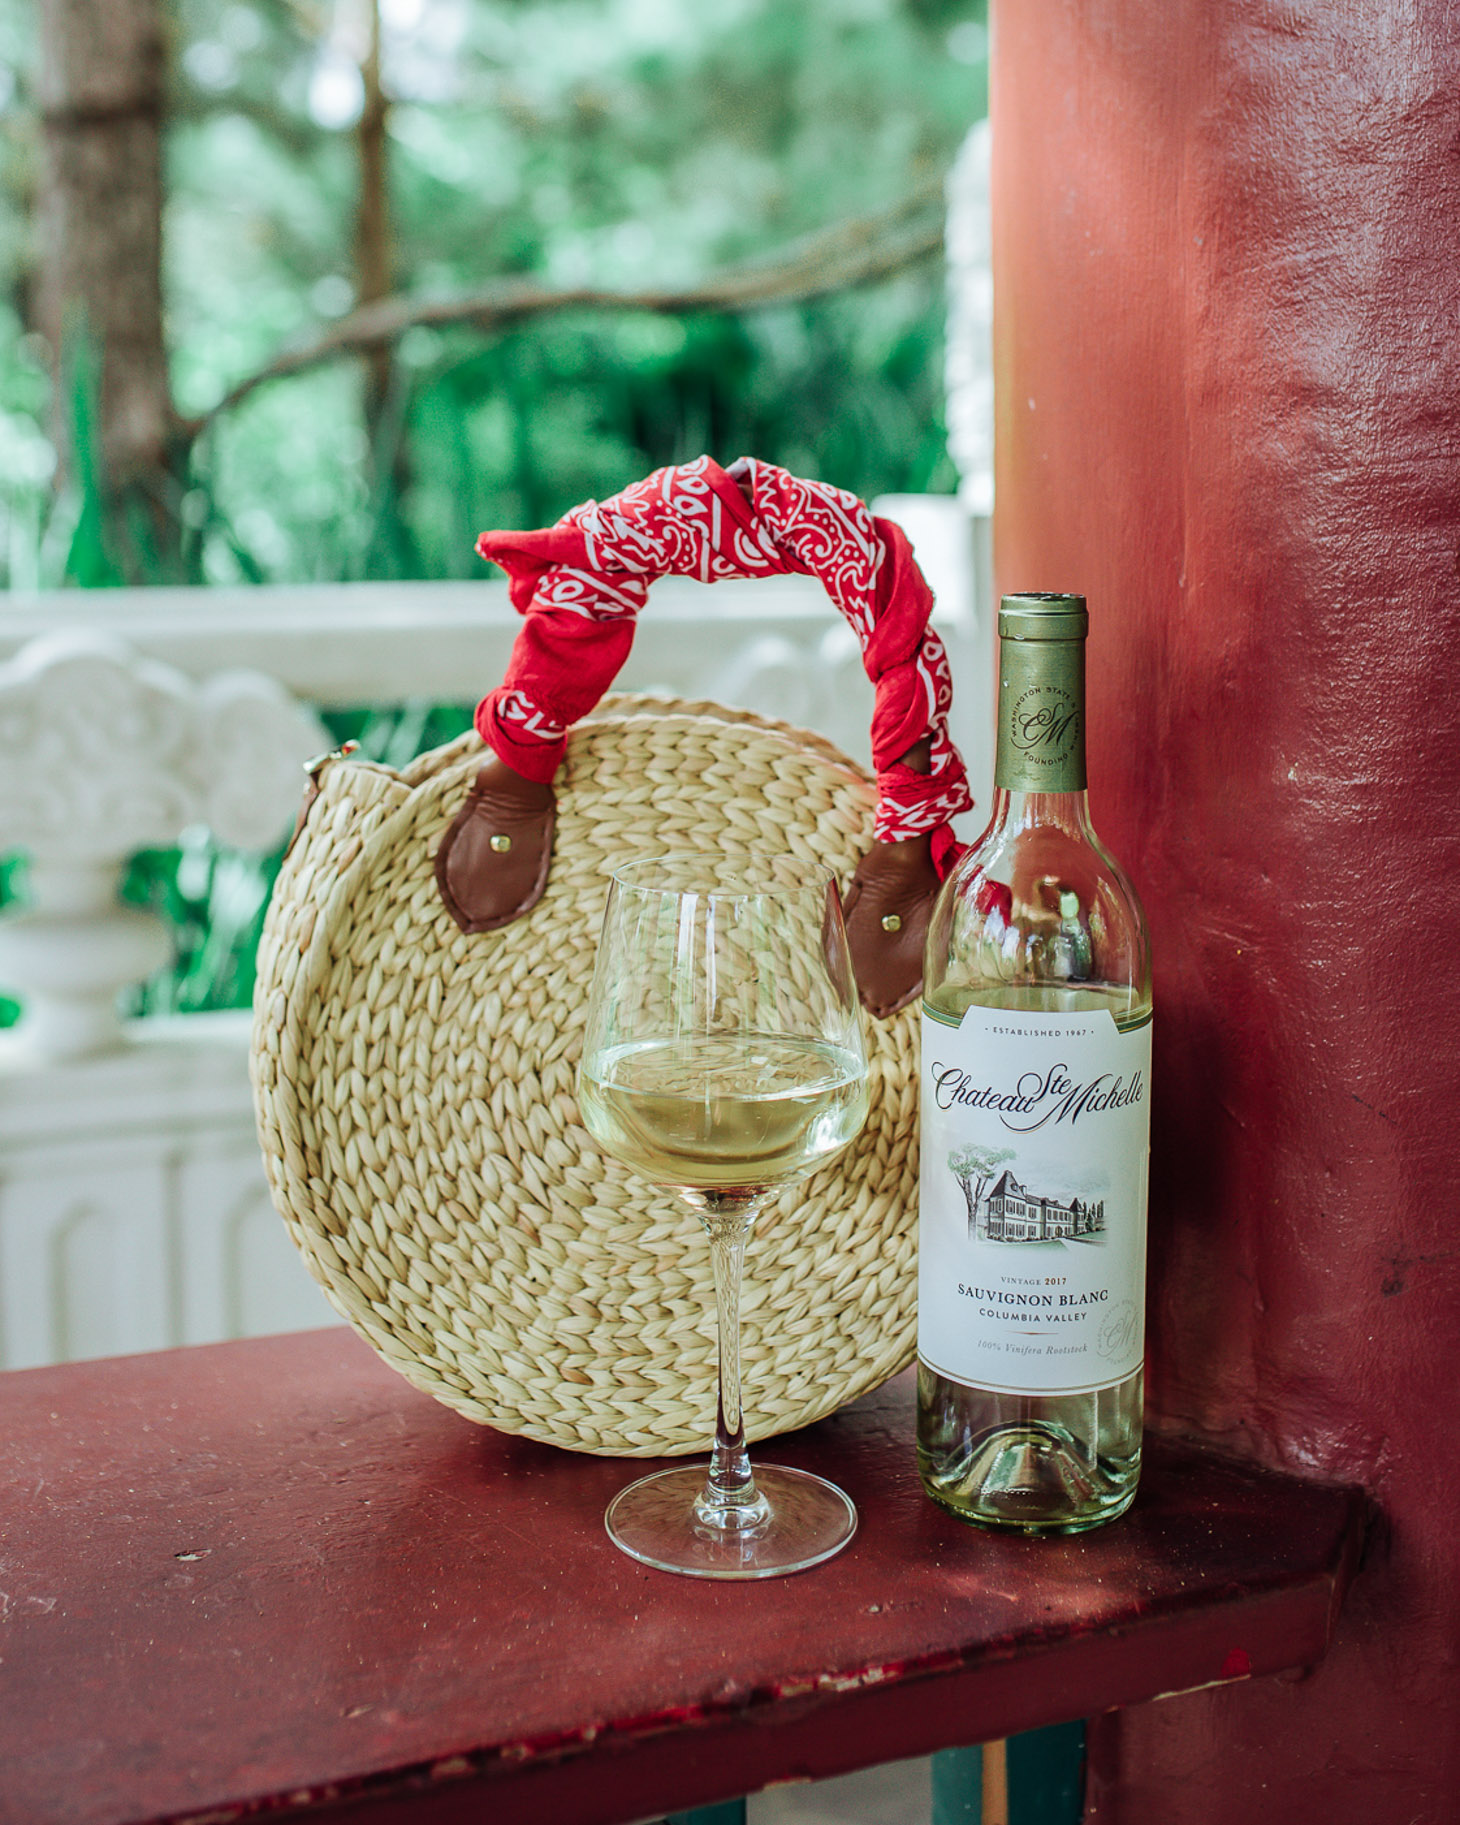 A Thoughtful Hostess Gift for Every Occassion by popular Texas lifestyle blog, Lone Star Looking Glass: image of a bottle and glass full of Chateau Ste. Michelle wine next to a woven circular purse. 